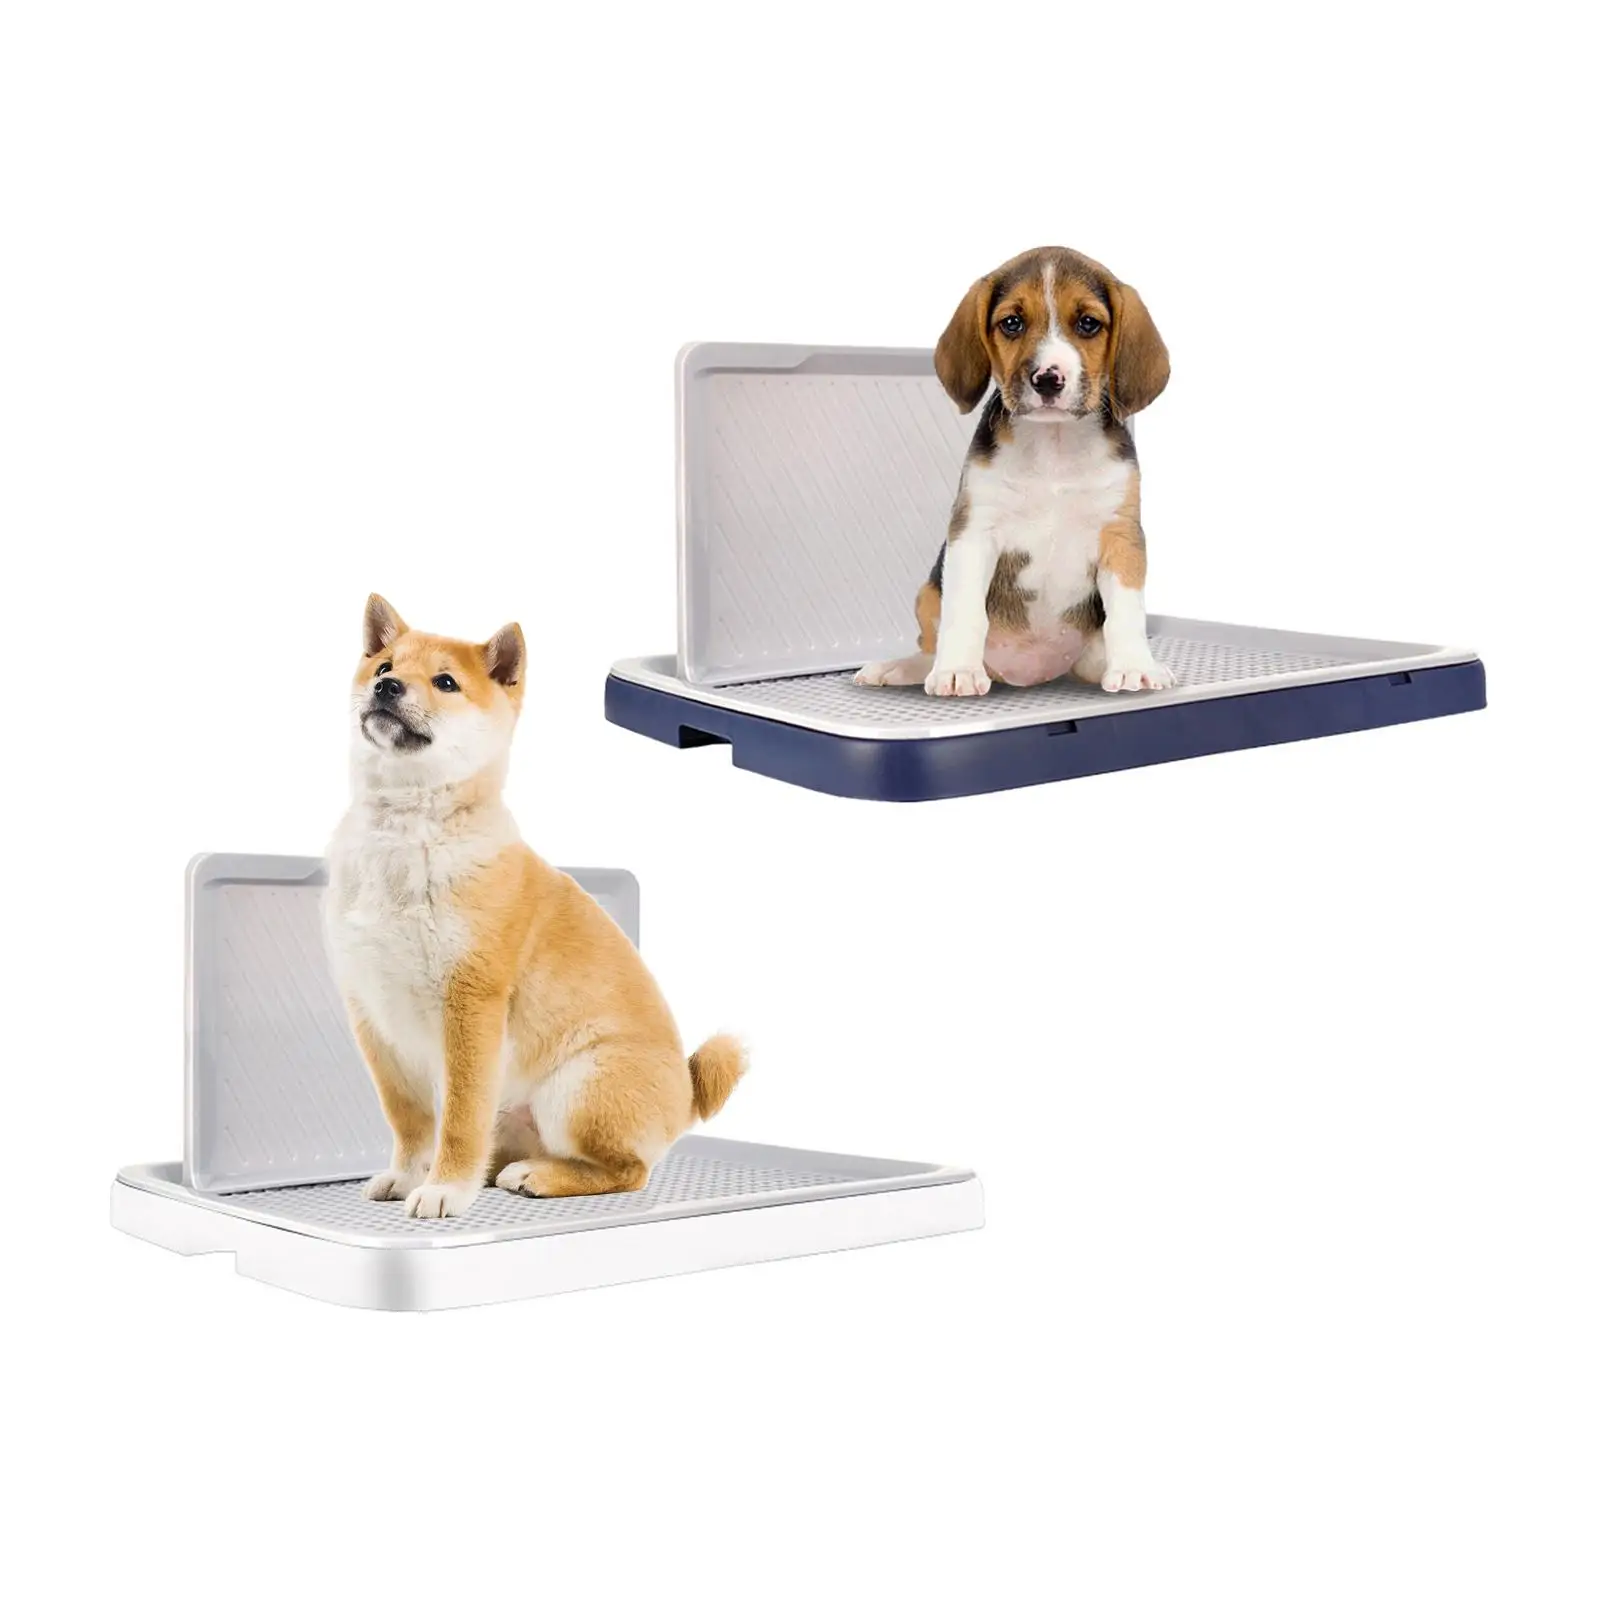 Dog Toilet Dog Potty Tray Removable Potty Trainer Corner for Dogs Cats Puppy Bunny